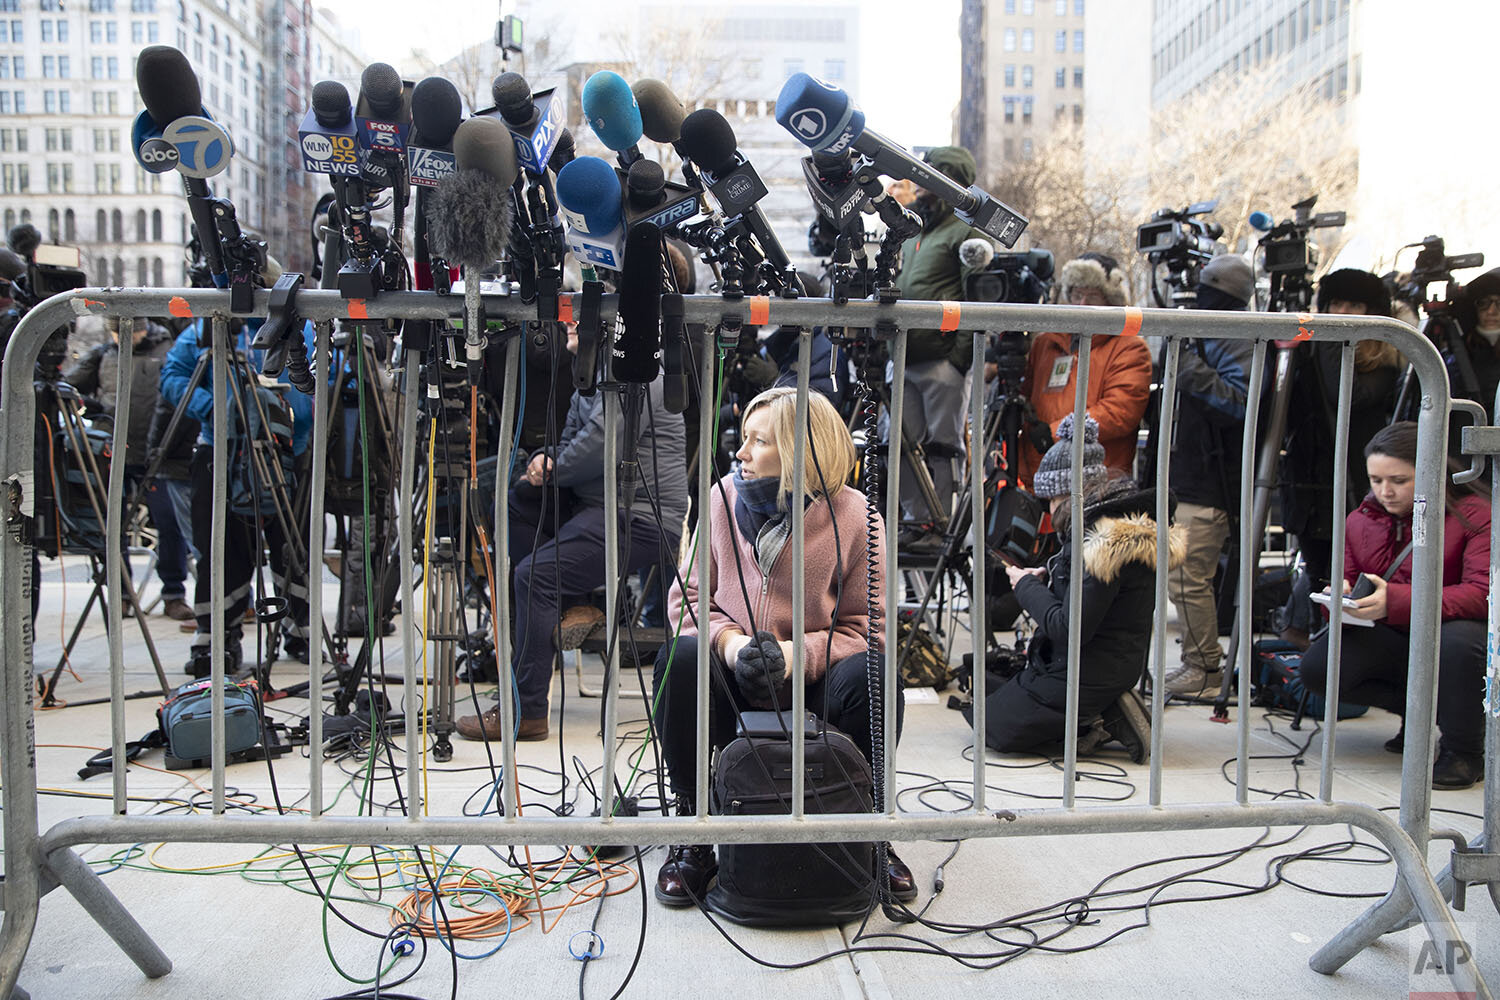  A reporter waits for lawyers to come address the media after Harvey Weinstein left court for the day during jury deliberations in his rape trial, Friday, Feb. 21, 2020, in New York. (AP Photo/Mary Altaffer) 